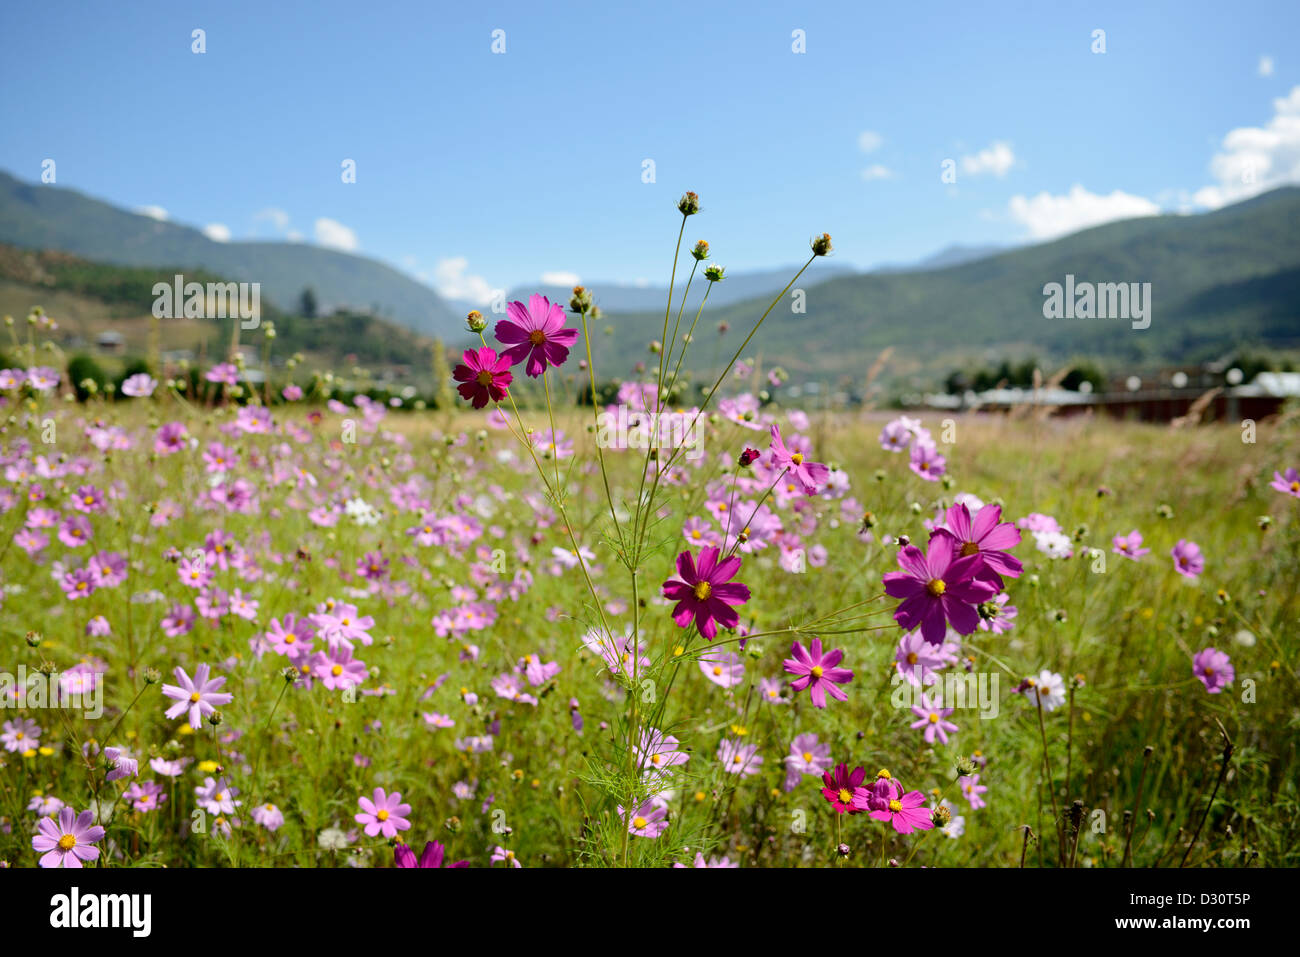 Wild flowers growing in a meadow Just moments from Bhutan's airport.,36MPX Stock Photo